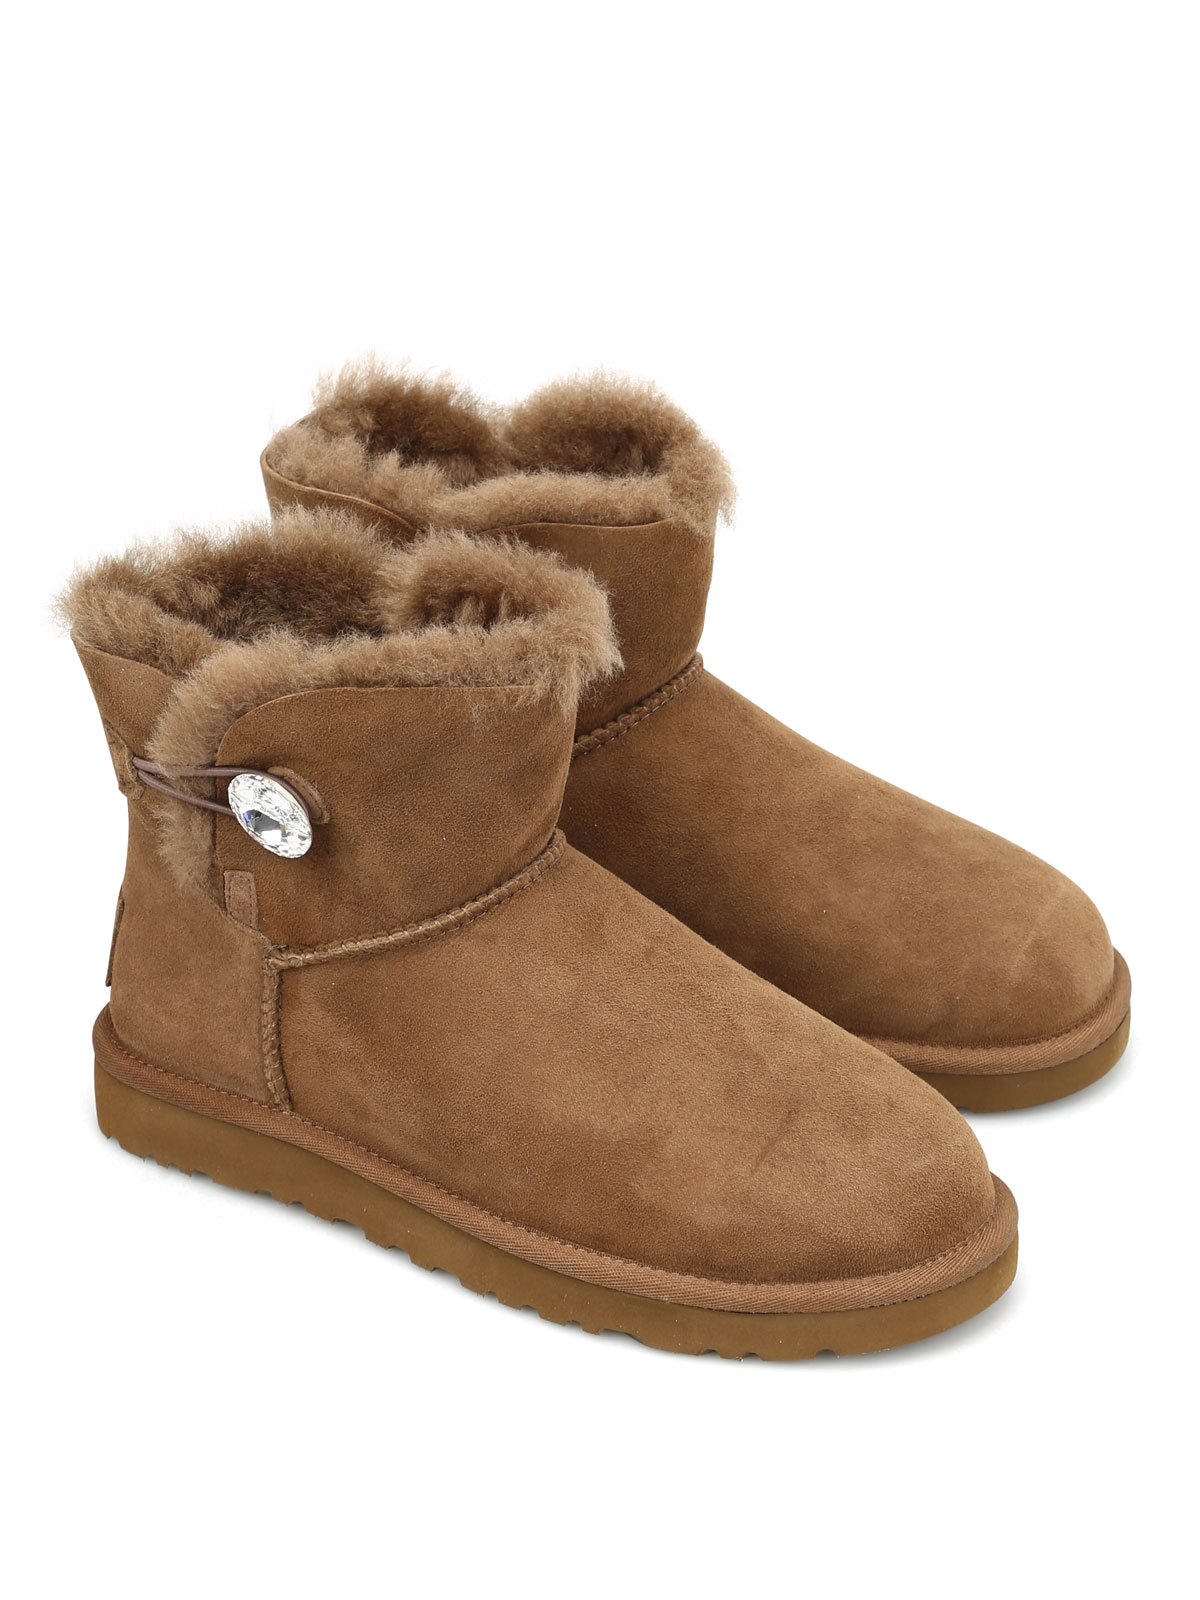 ugg bailey button bling triplet